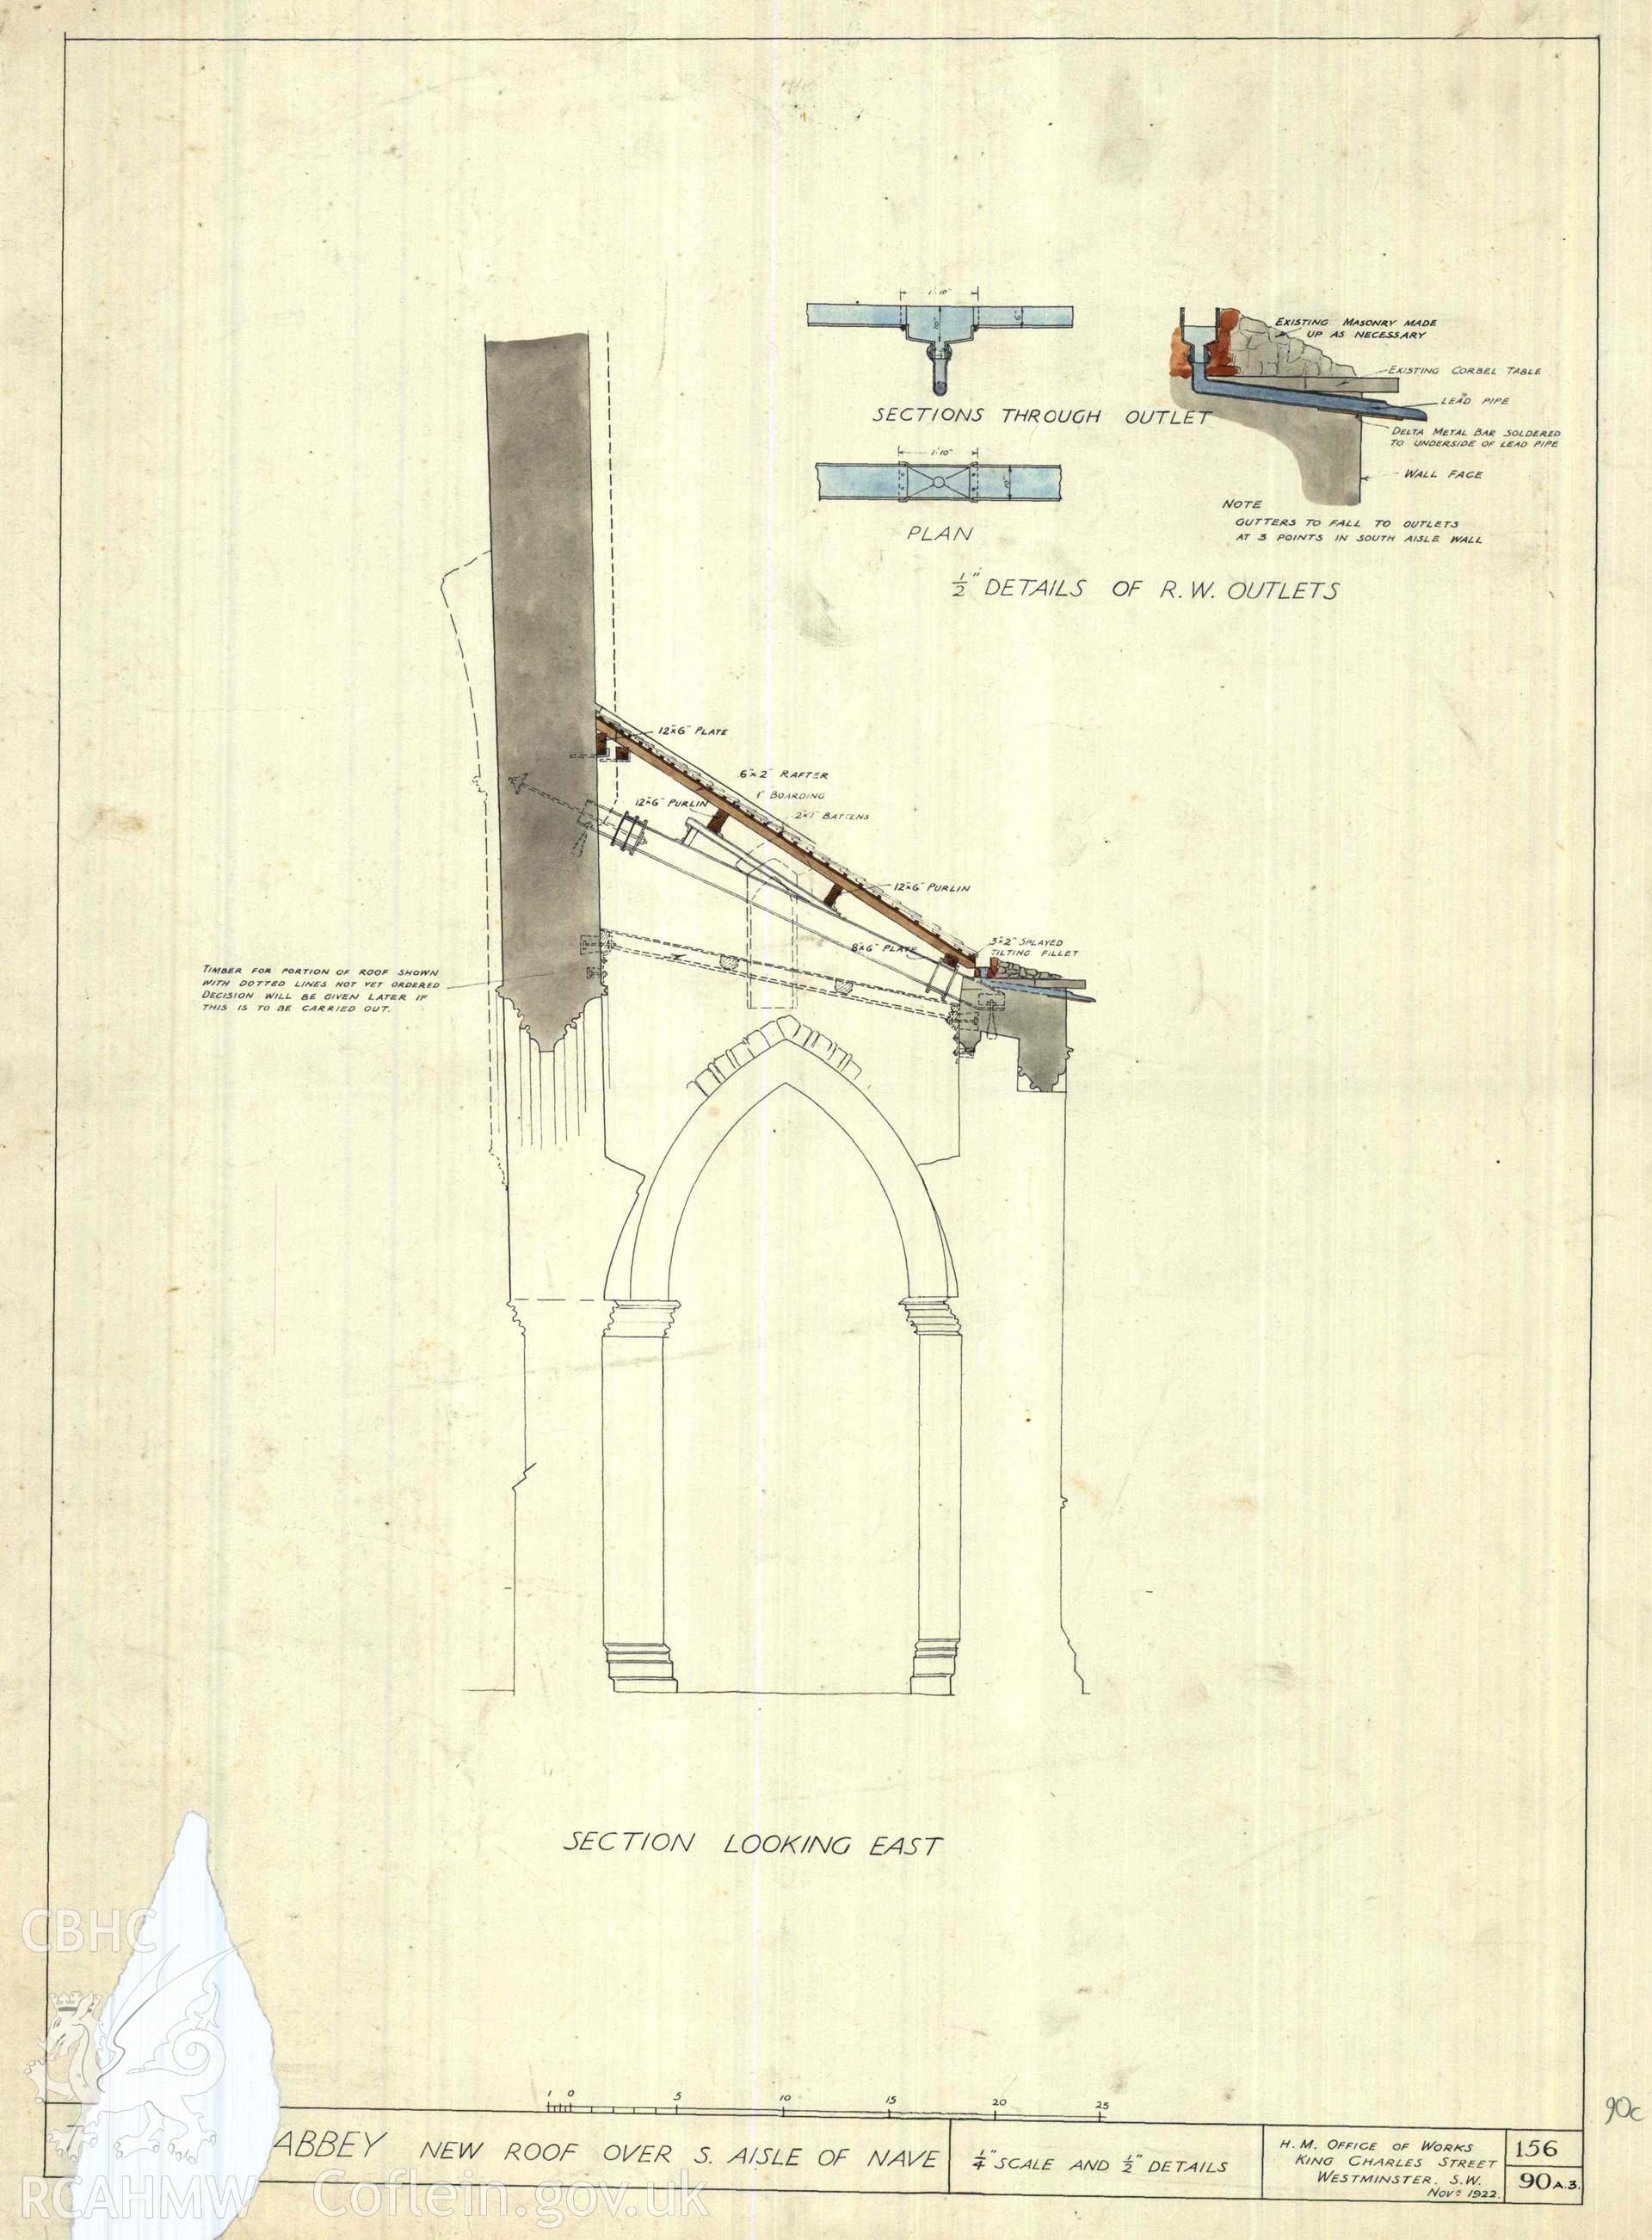 Cadw guardianship monument drawing of Tintern Abbey. New roof over S Aisle of Nave. Cadw ref. No. 156/90A3. Scale 1:24;48.